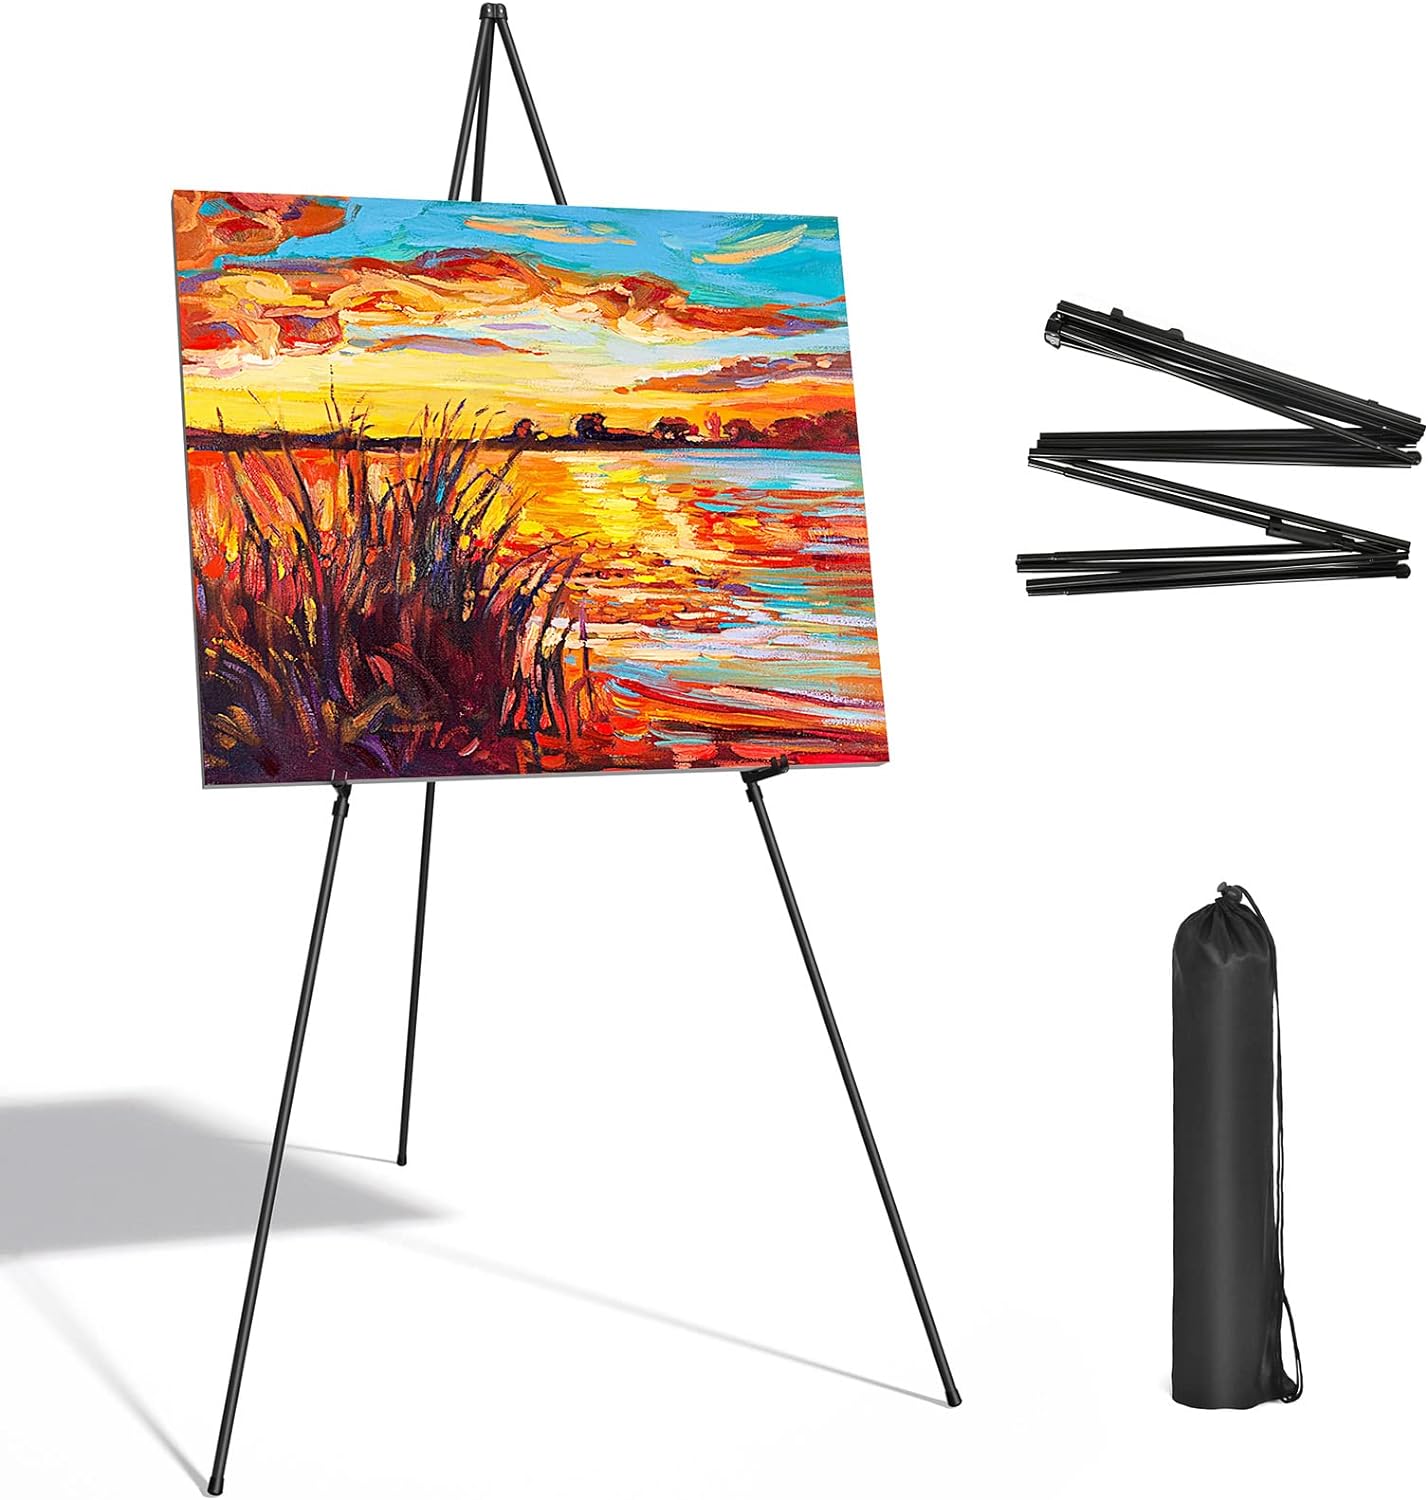 Instant Display Easel Stand - 63" Tripod Collapsible Portable Artist Floor Easel - Easy Folding Telescoping Adjustable Art Poster Metal Stand for Display Show - image 1 of 10